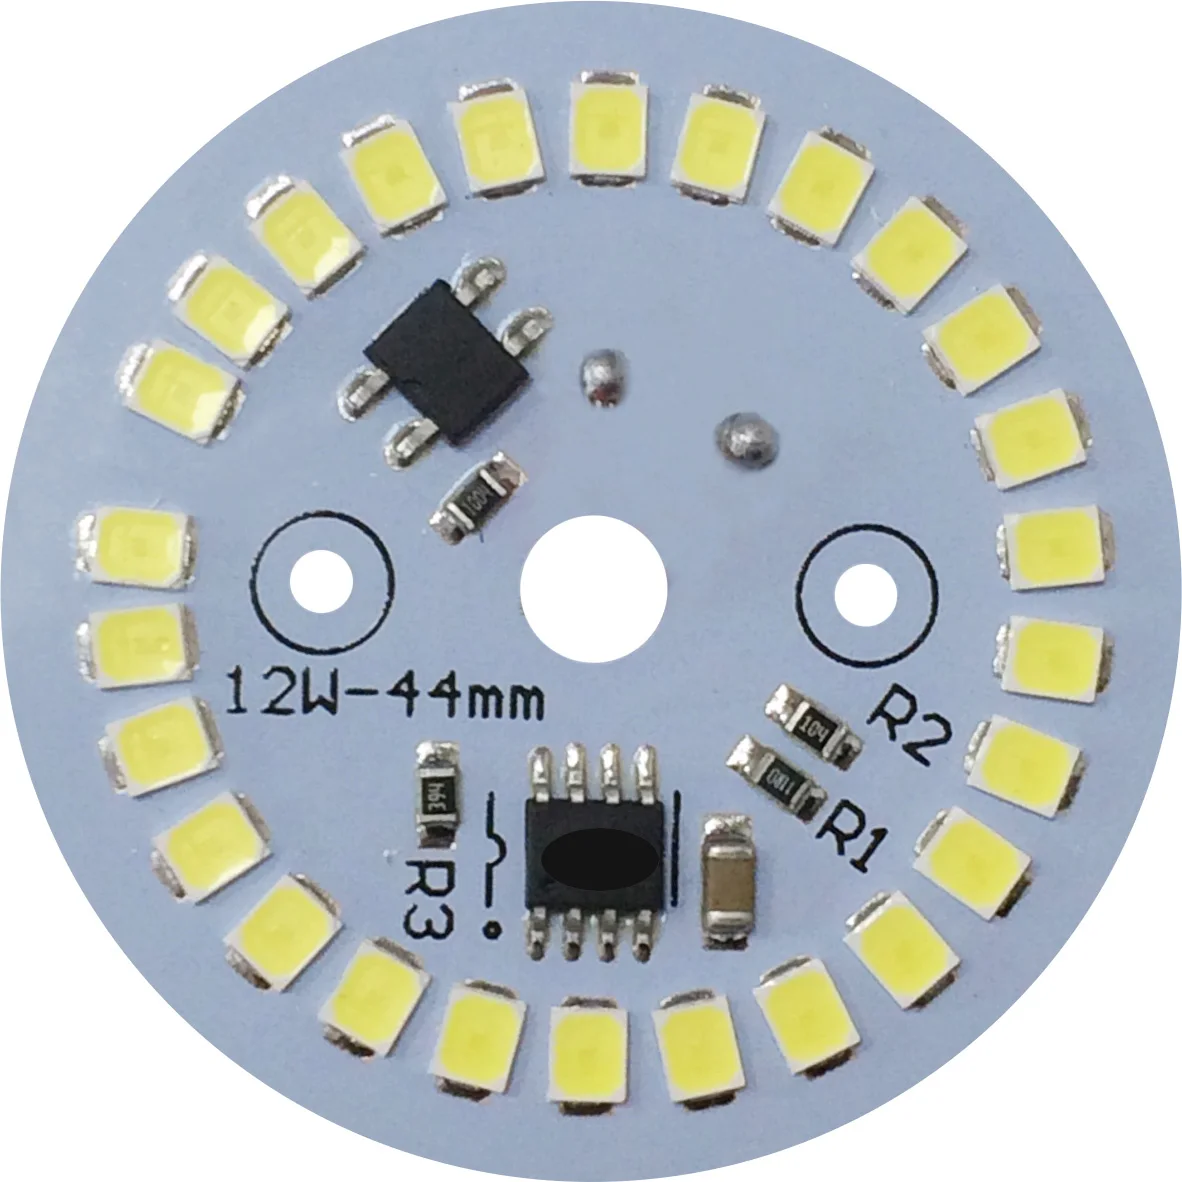 12w led bulb raw material parts pcb without driver led pcb together connect 220v indoor led module  led bulb  led chip dob pcb